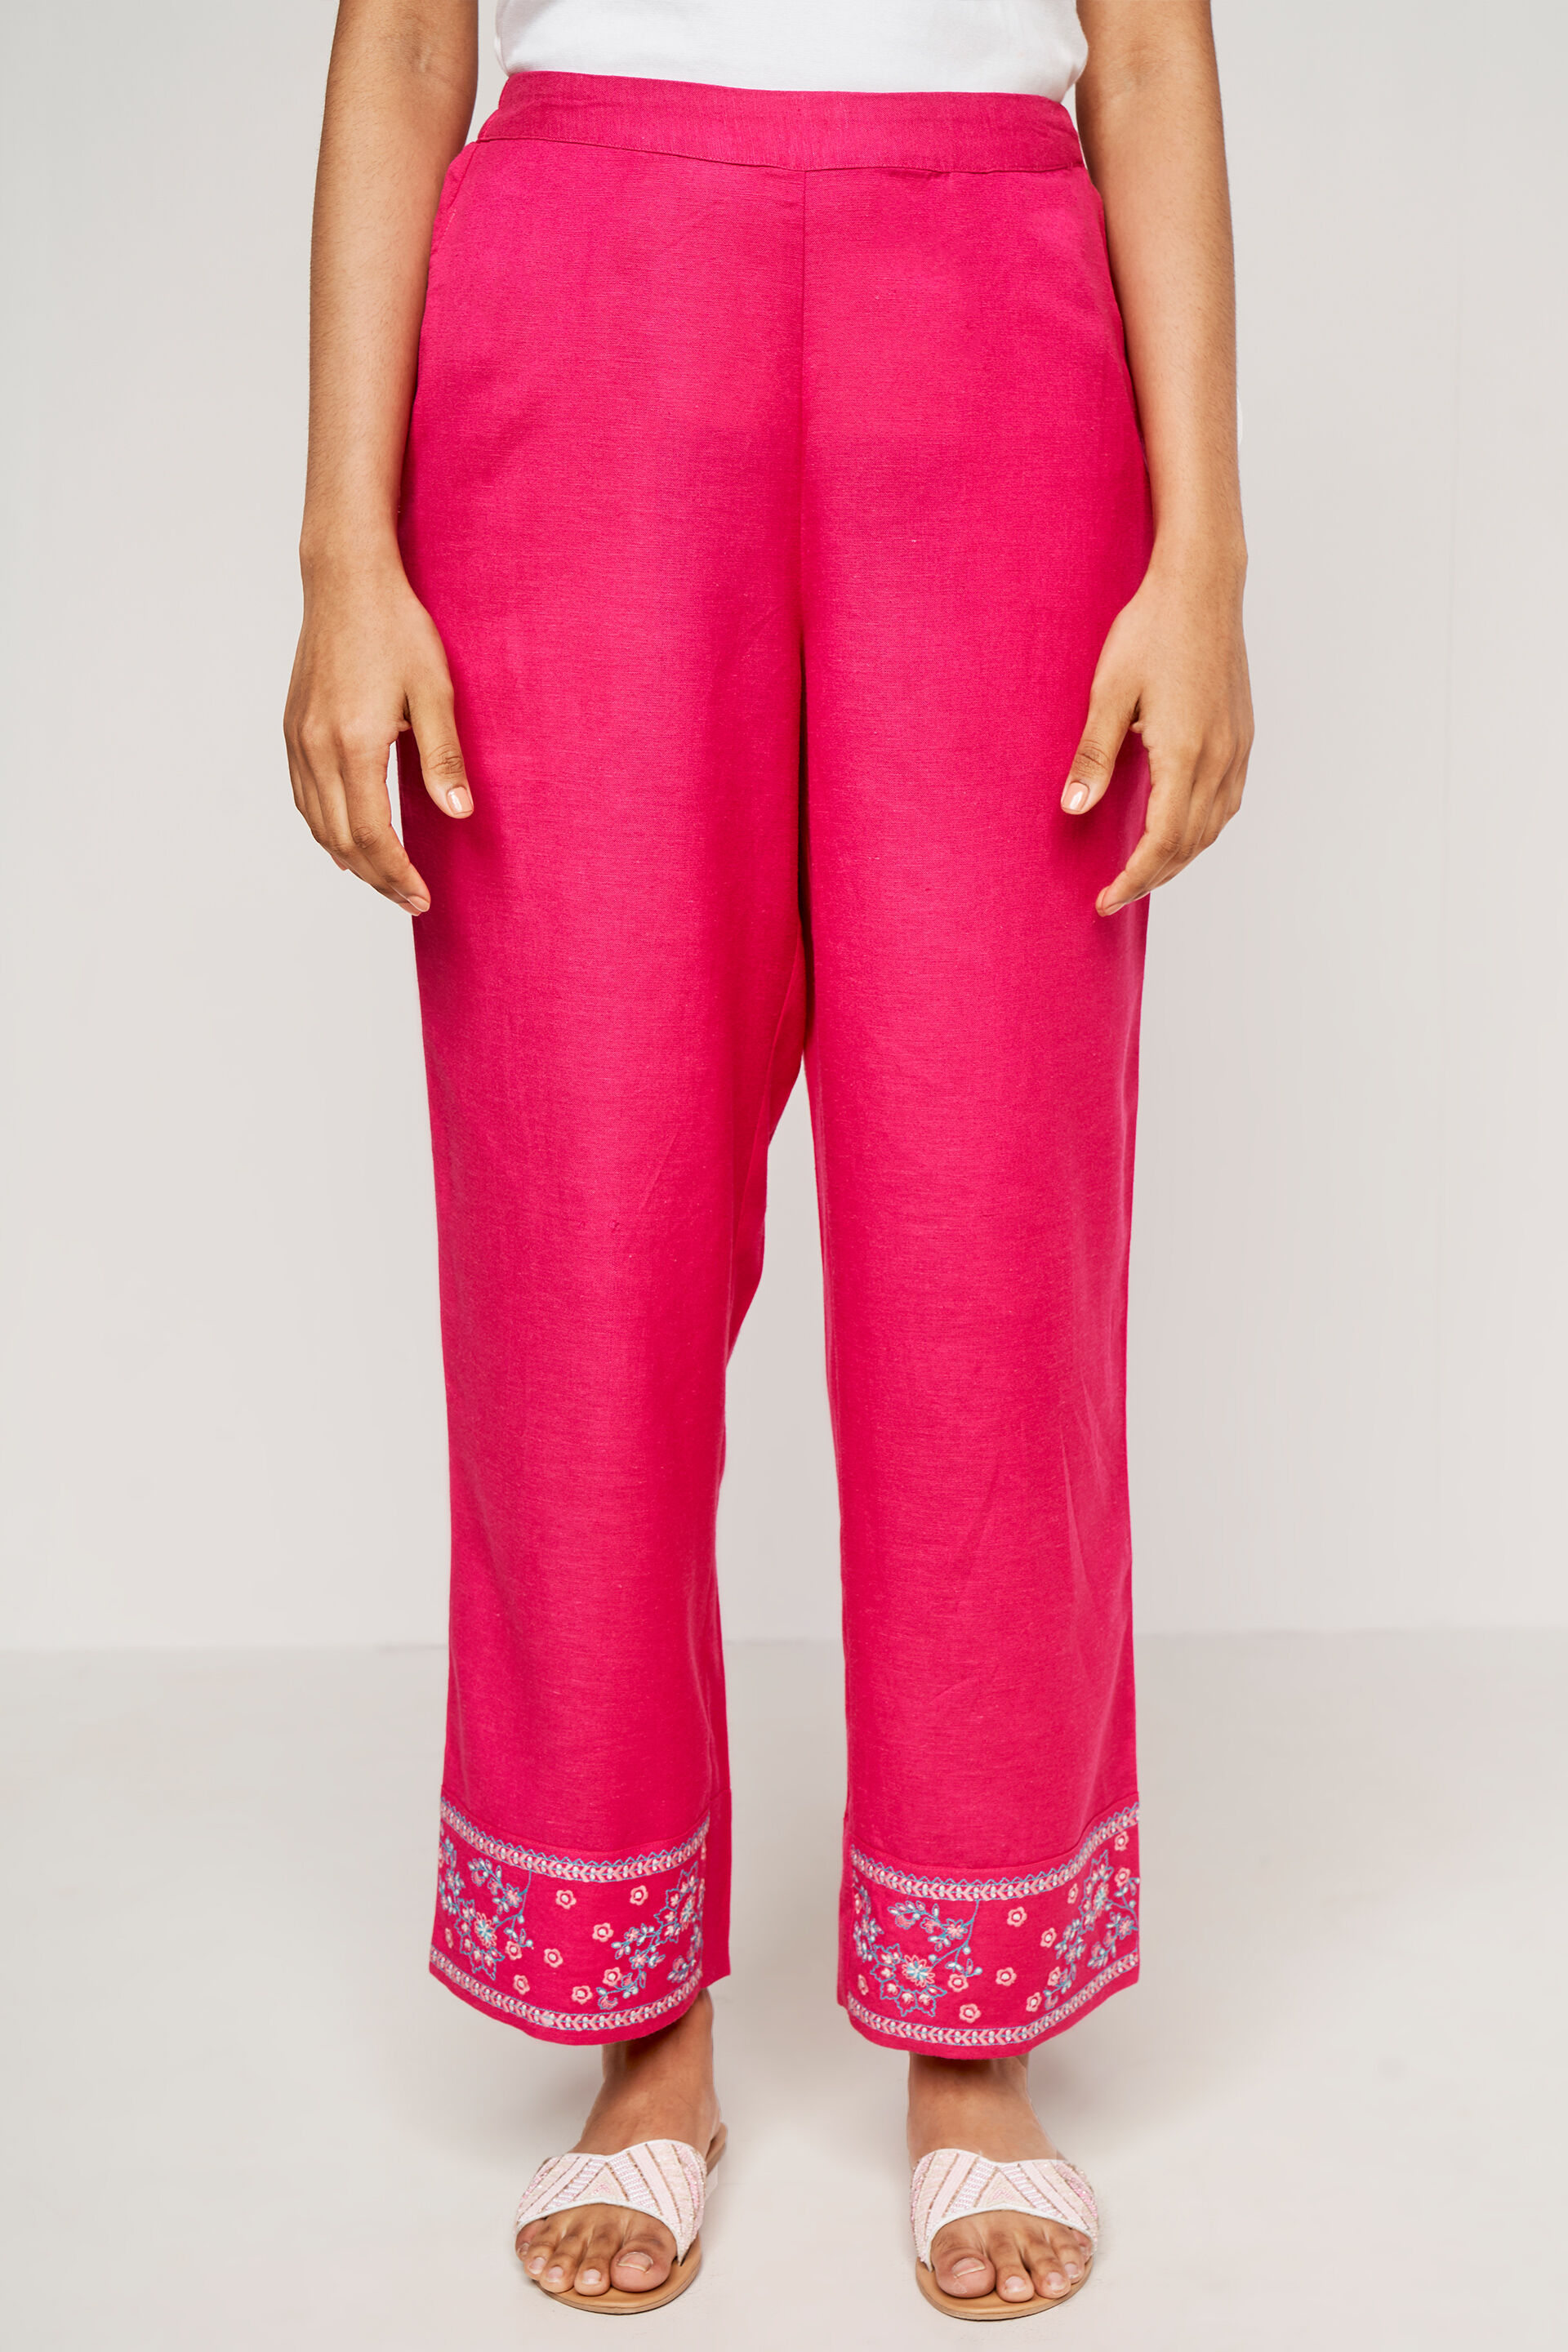 Plus Size Plus Size Bright Pink Pants Online in India | Amydus